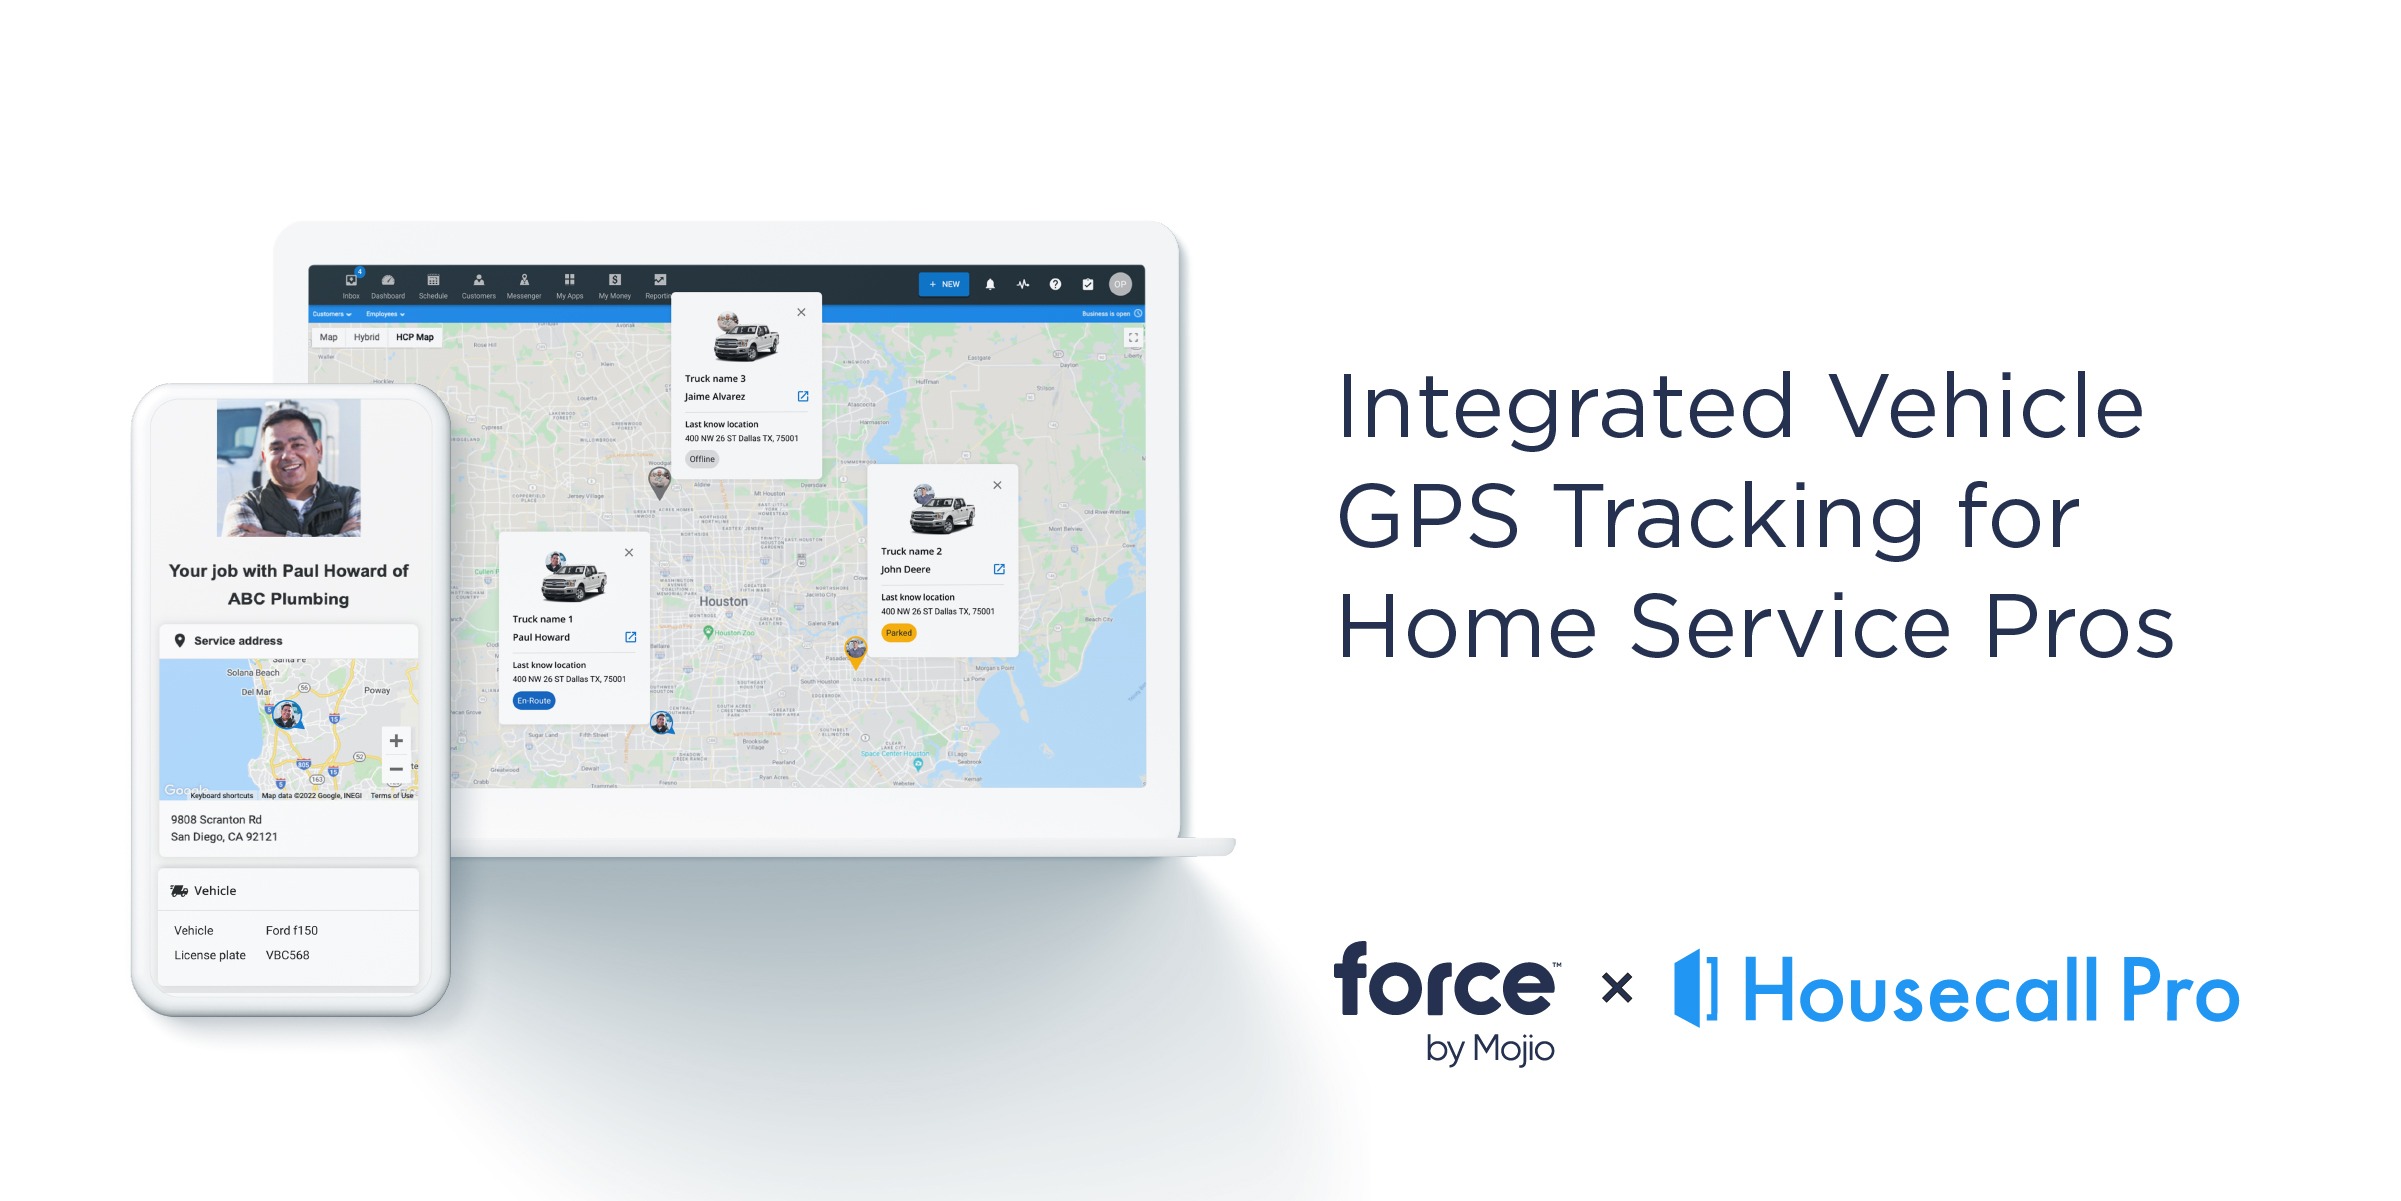 Housecall Pro and Force by Mojio Integrated Vehicle GPS Tracking